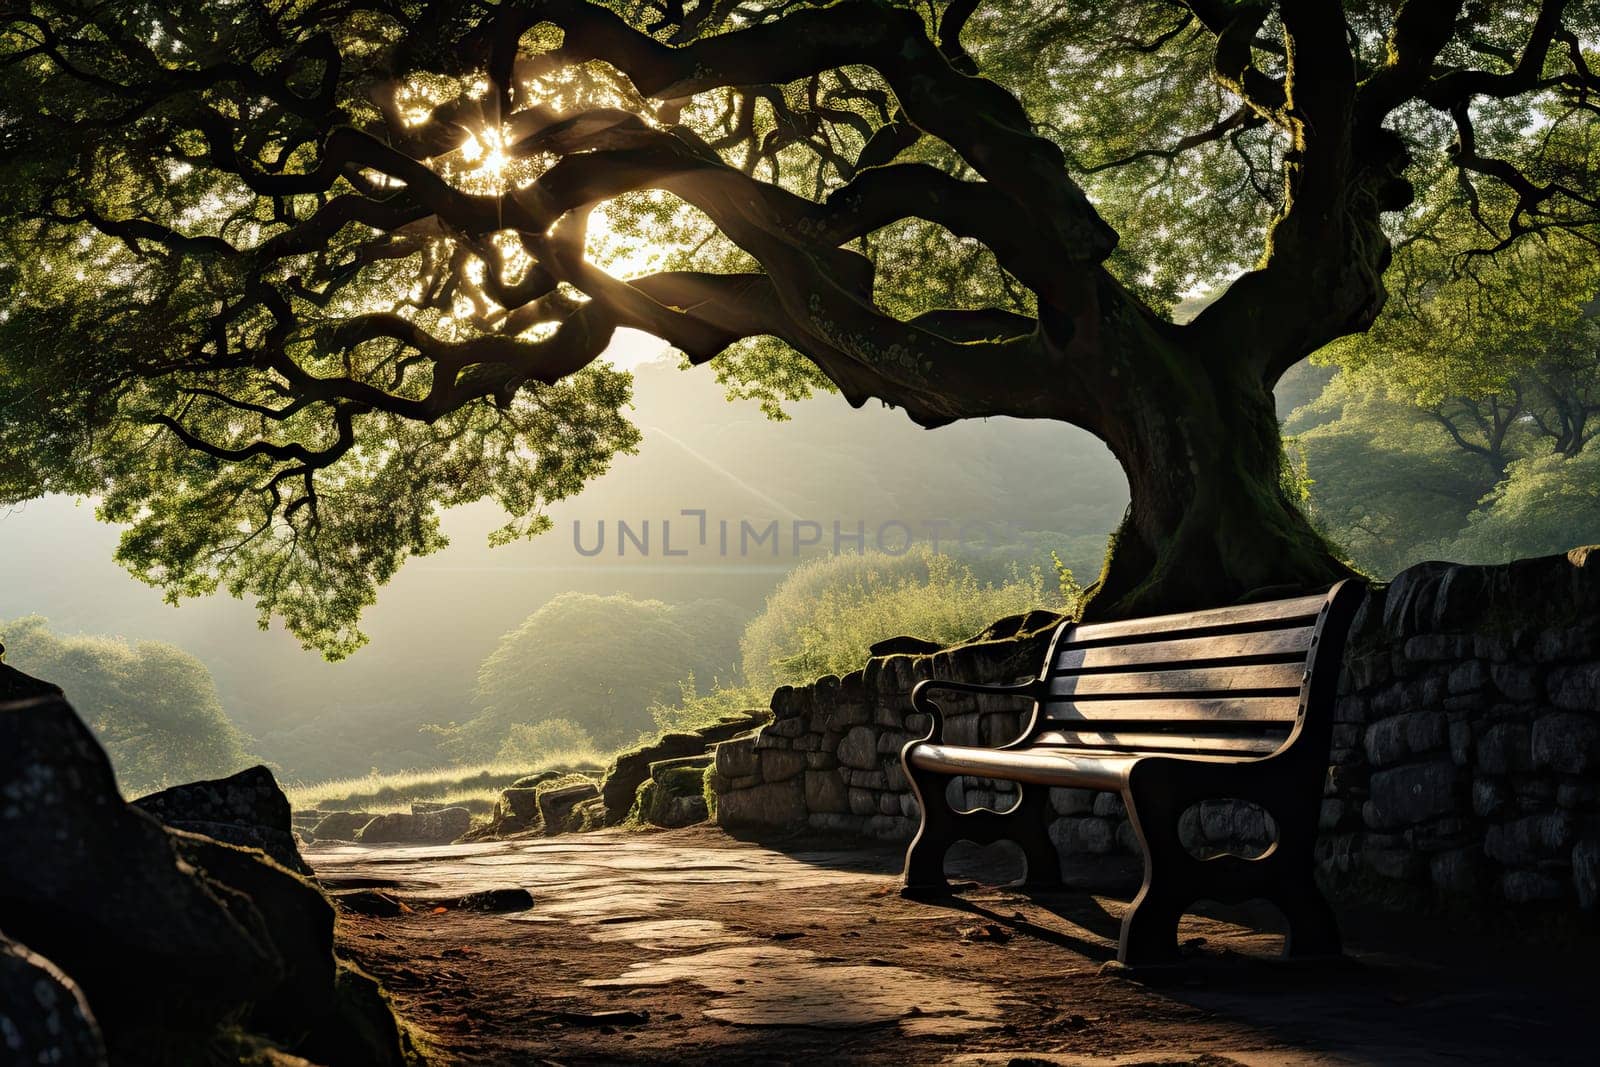 The Serenity of Nature: A Tranquil Park Bench Beneath a Majestic, Shade-Providing Tree